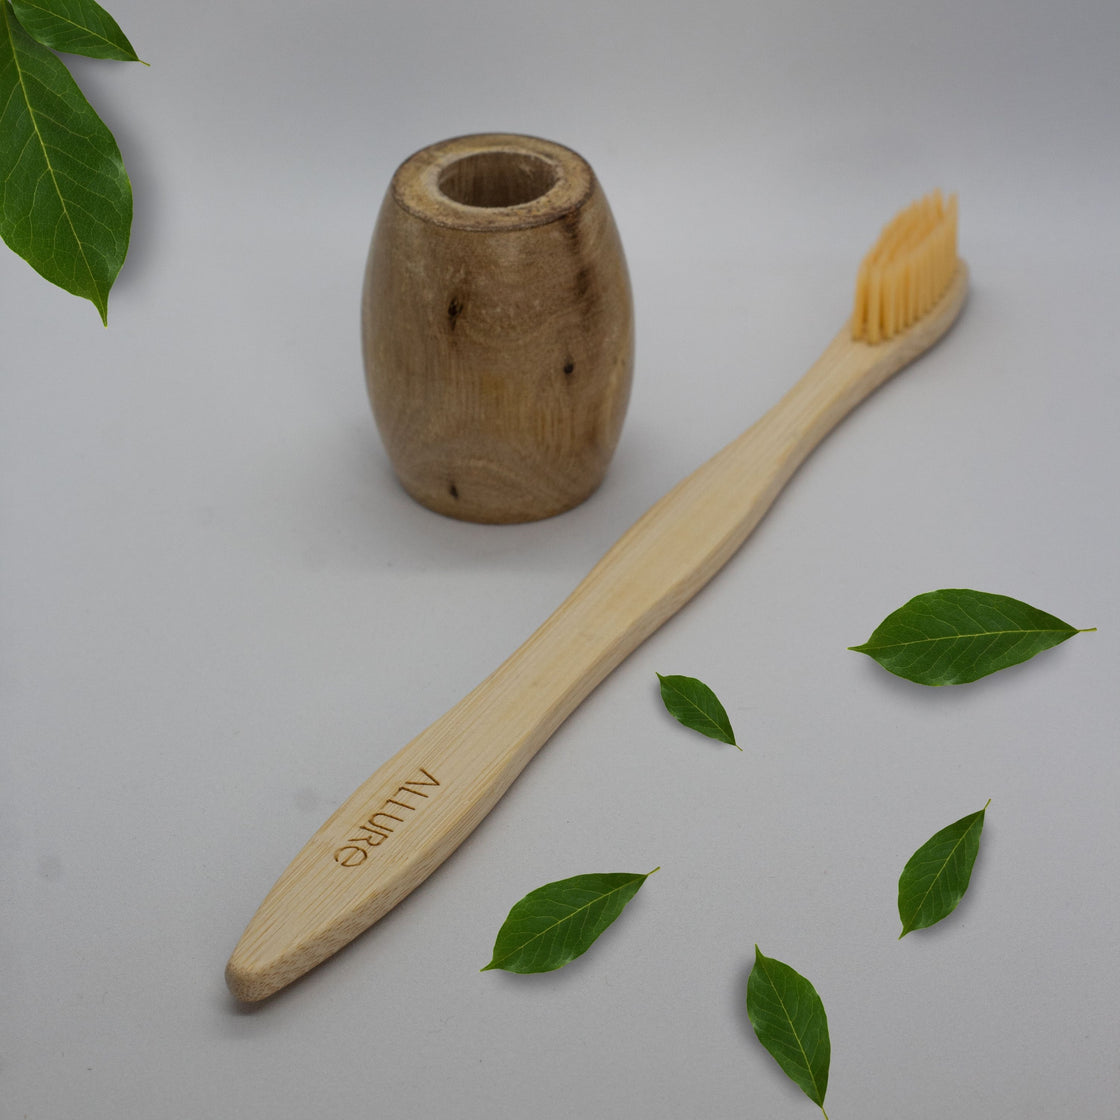 Allure Bamboo Toothbrush with Wooden Toothbrush stand 